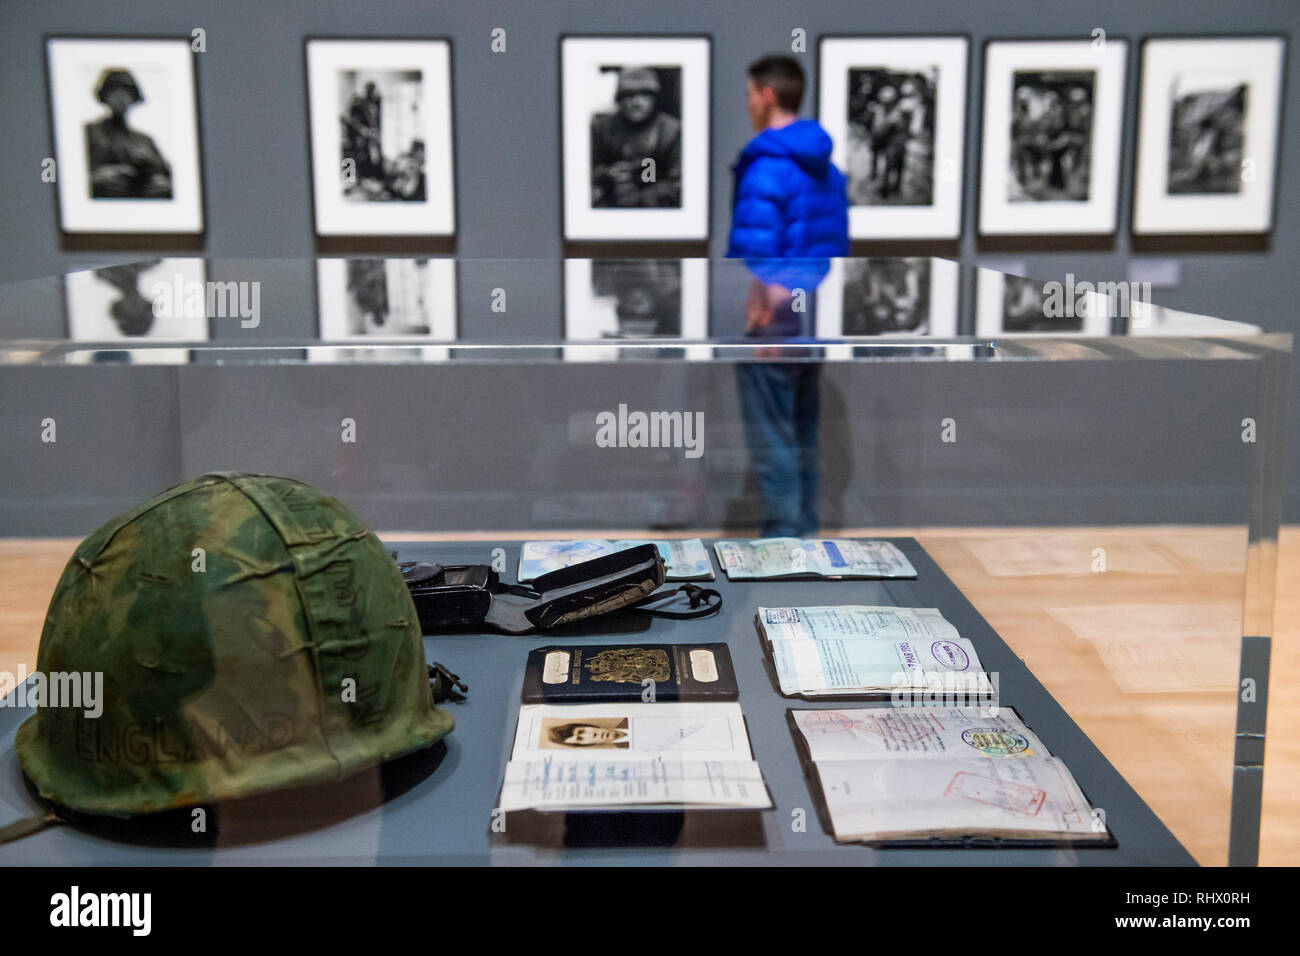 London, UK. 4th February, 2019. Passports, cameras and a Magnum helmet - A retrospective of the British photographer Sir Don McCullin at Tate Britain. With over 250 photographs, all printed by the artist himself in his own darkroom. Often taken at great personal risk, his conflict photographs are shown alongside his work in documentary photography, his travel assignments and his long term engagement with landscape and still life. The exhibition runs from 5 Feb to 6 May 2019. Credit: Guy Bell/Alamy Live News Stock Photo